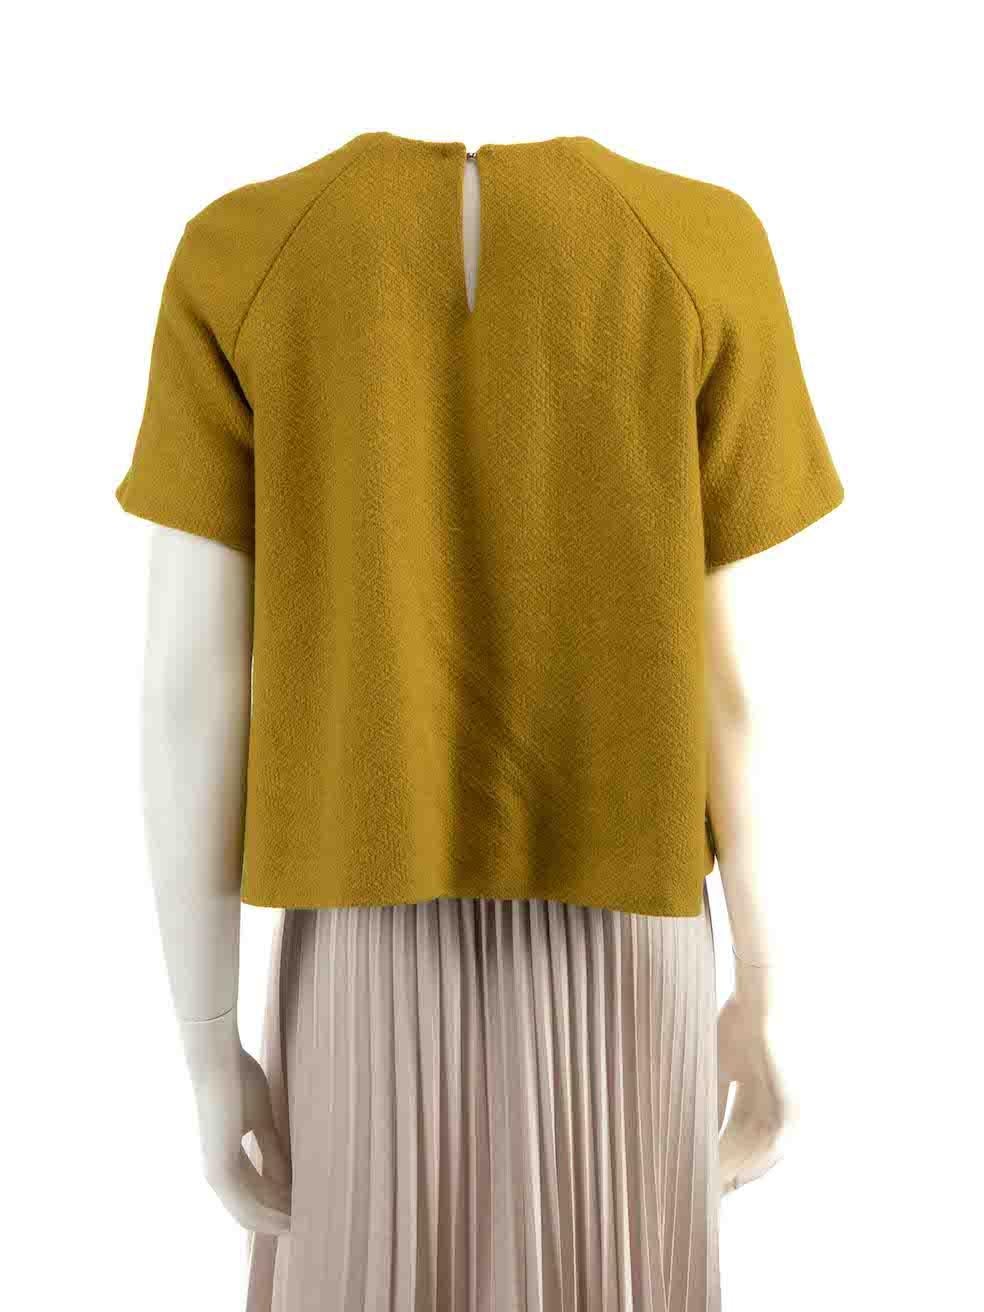 Emilia Wickstead Green Wool Round Neck Top Size M In Excellent Condition For Sale In London, GB